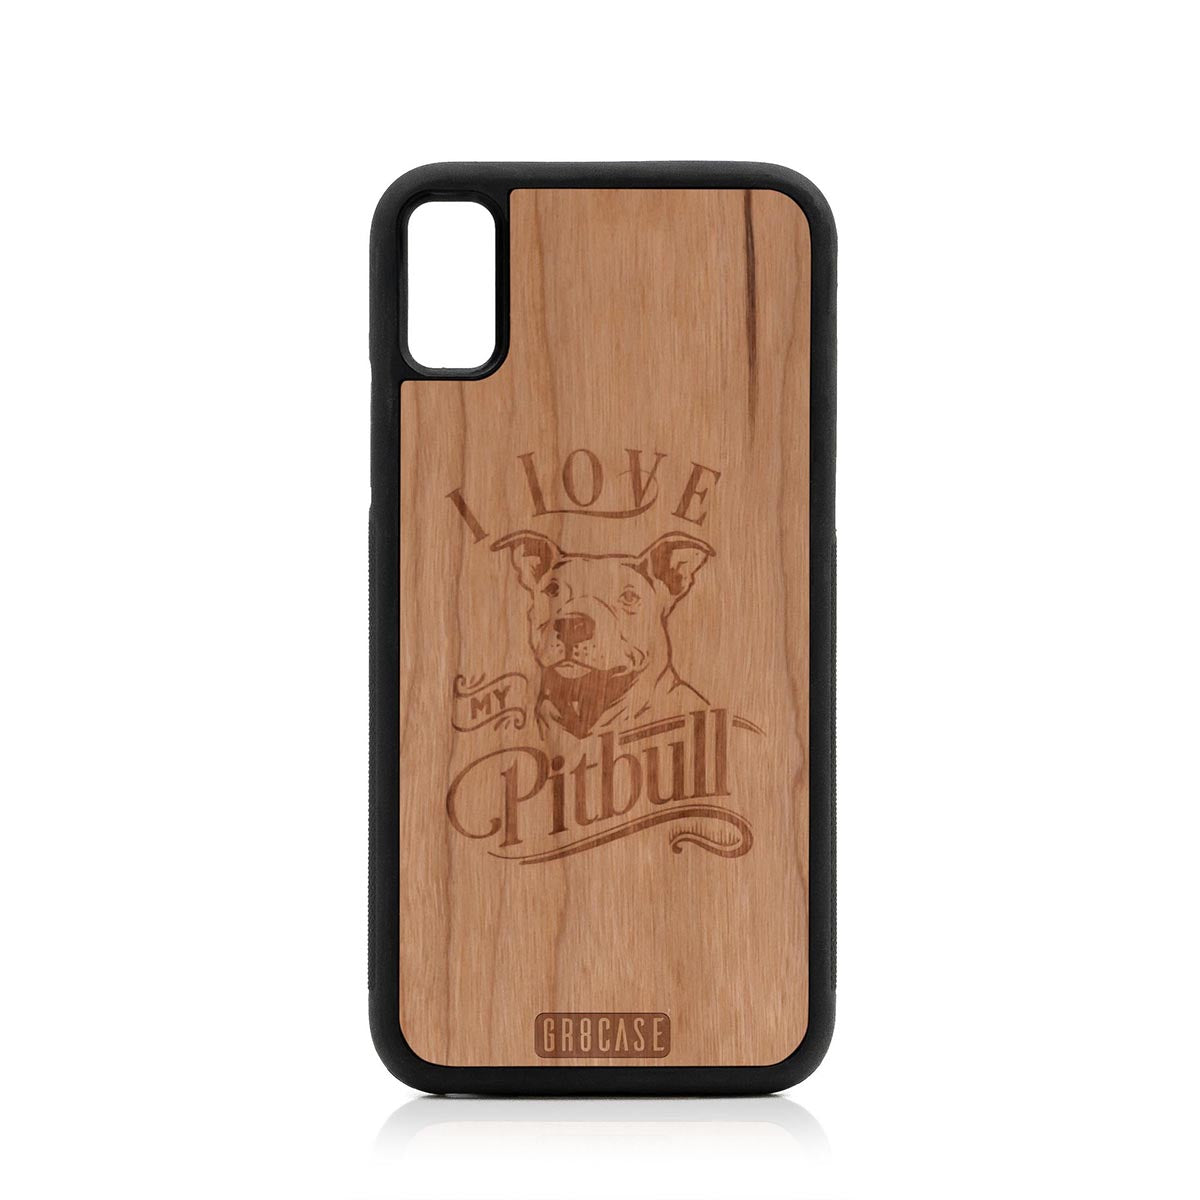 I Love My Pitbull Design Wood Case For iPhone XR by GR8CASE